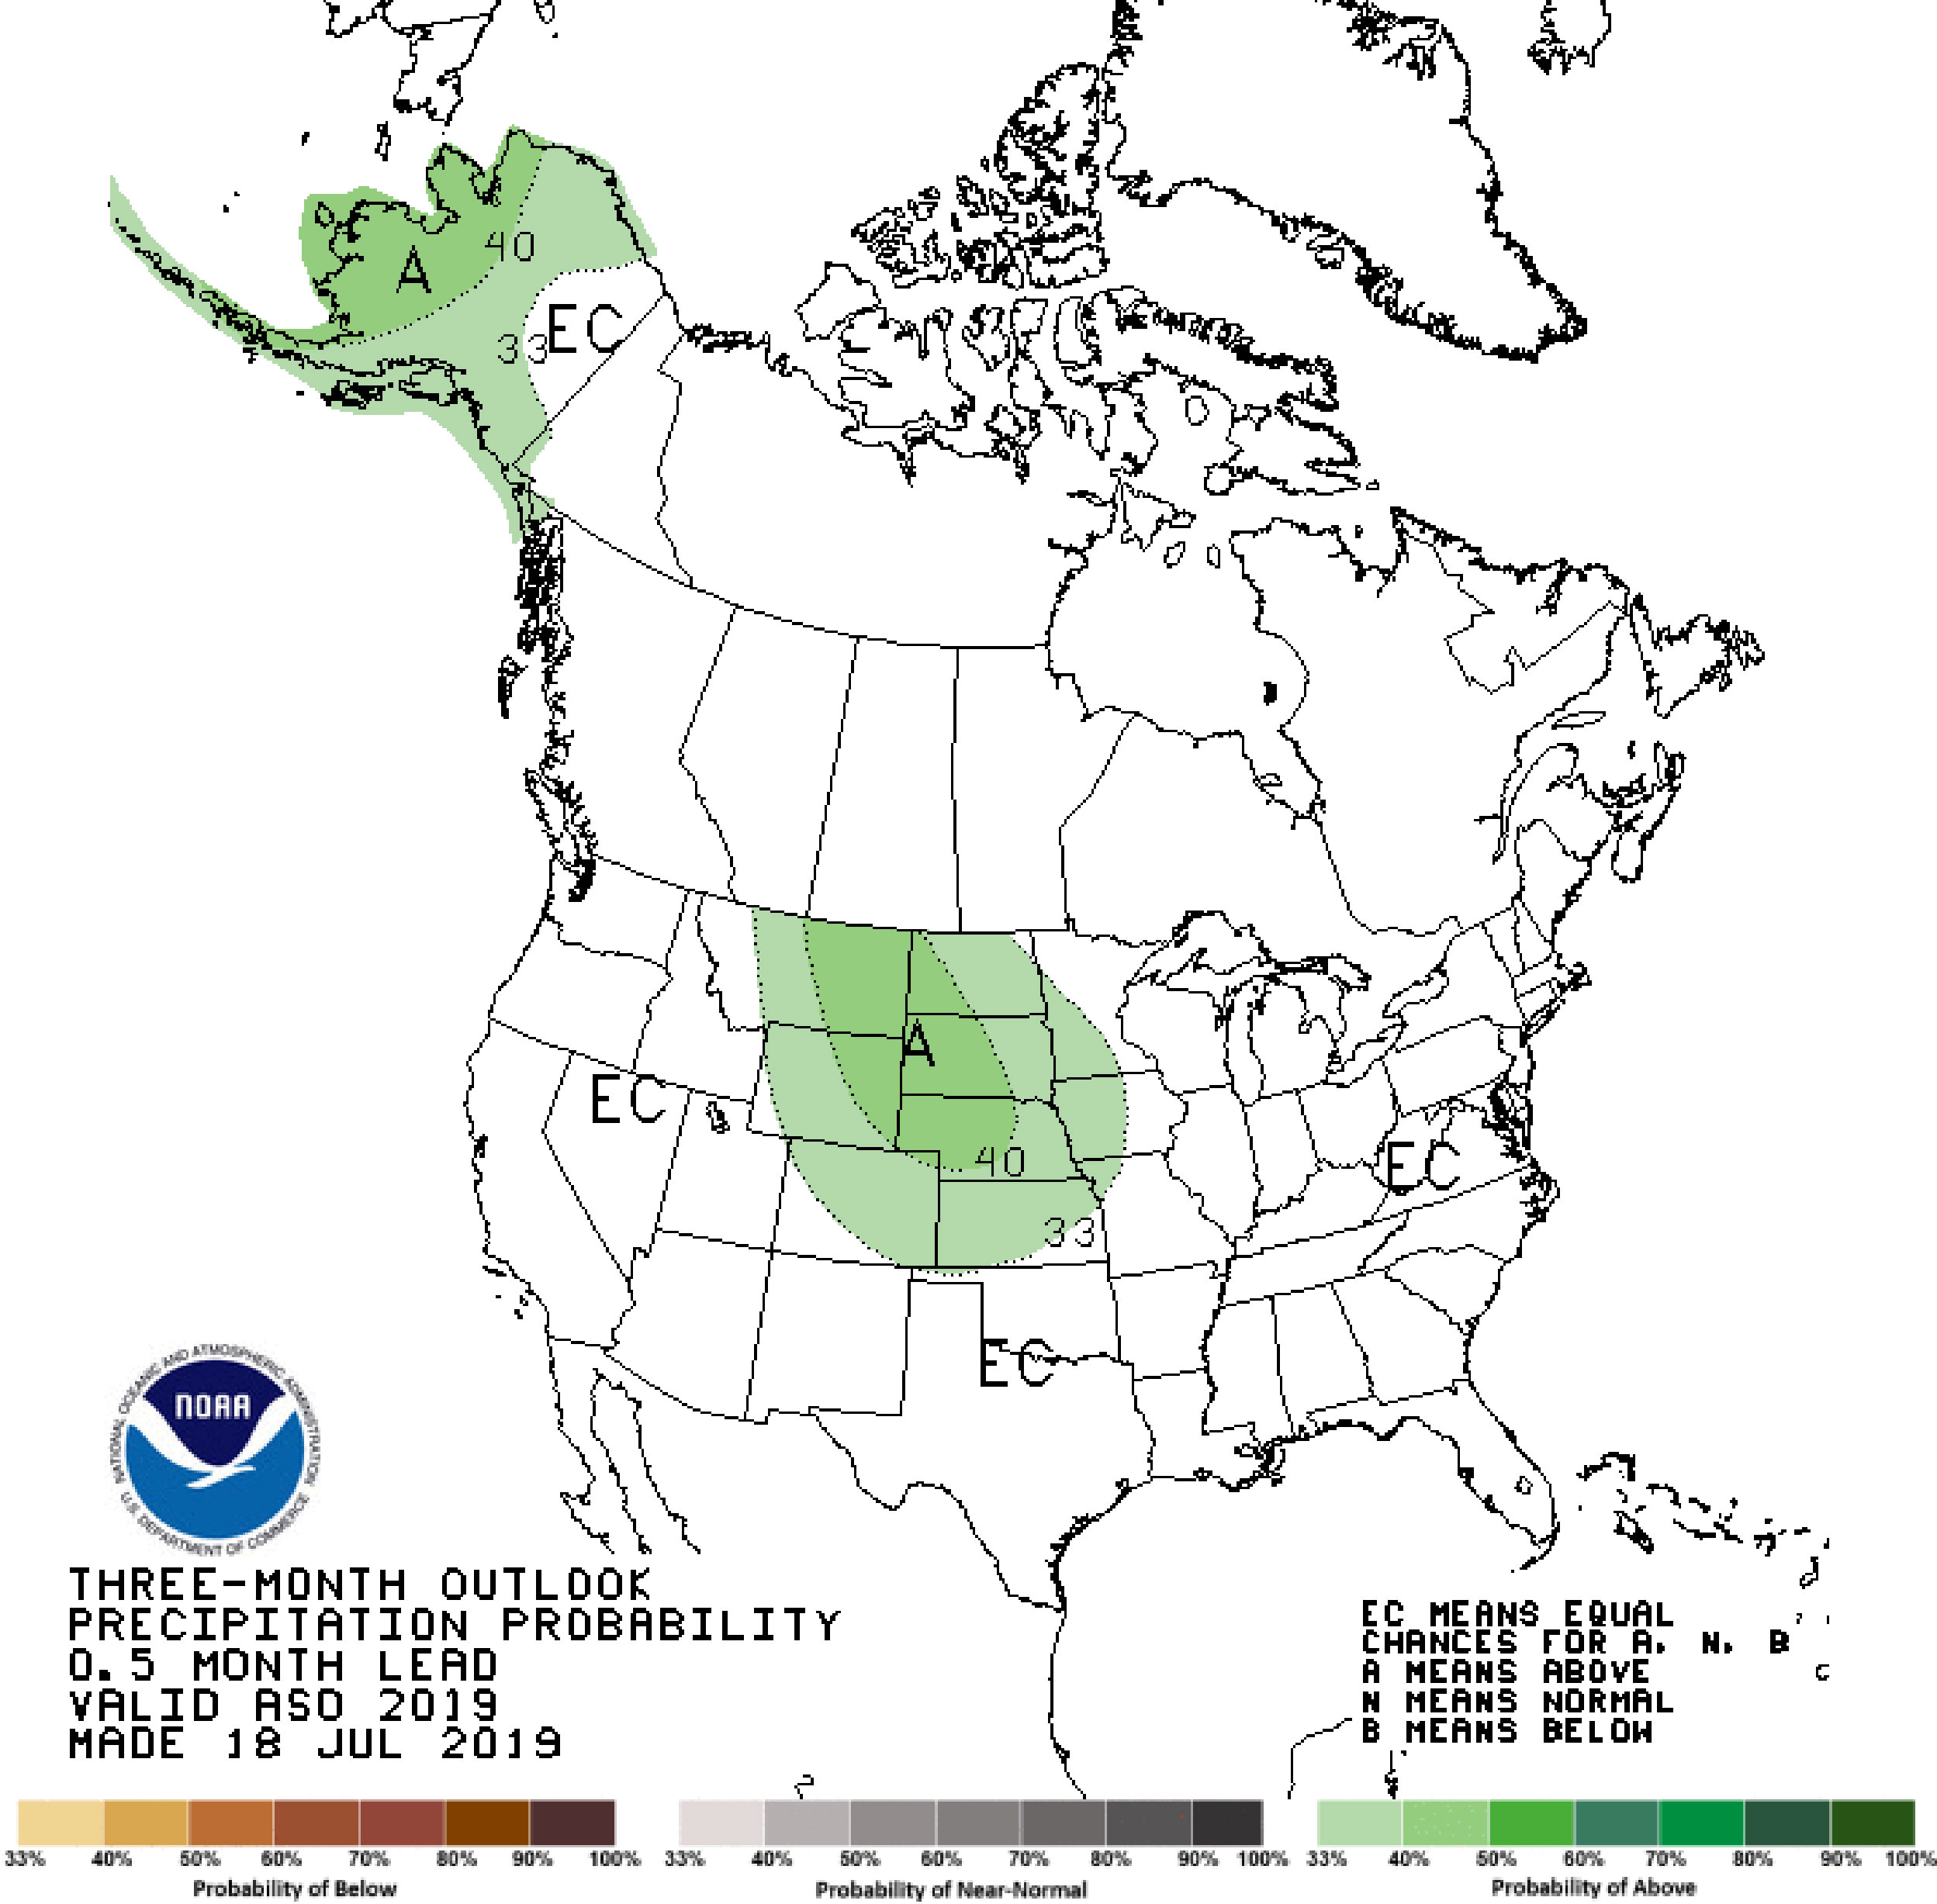 A color-coded map of the United Statees showing the precipitation outlook for August through October 2019. All of South Dakota is light green. Parts of Western South Dakota are a darker green.